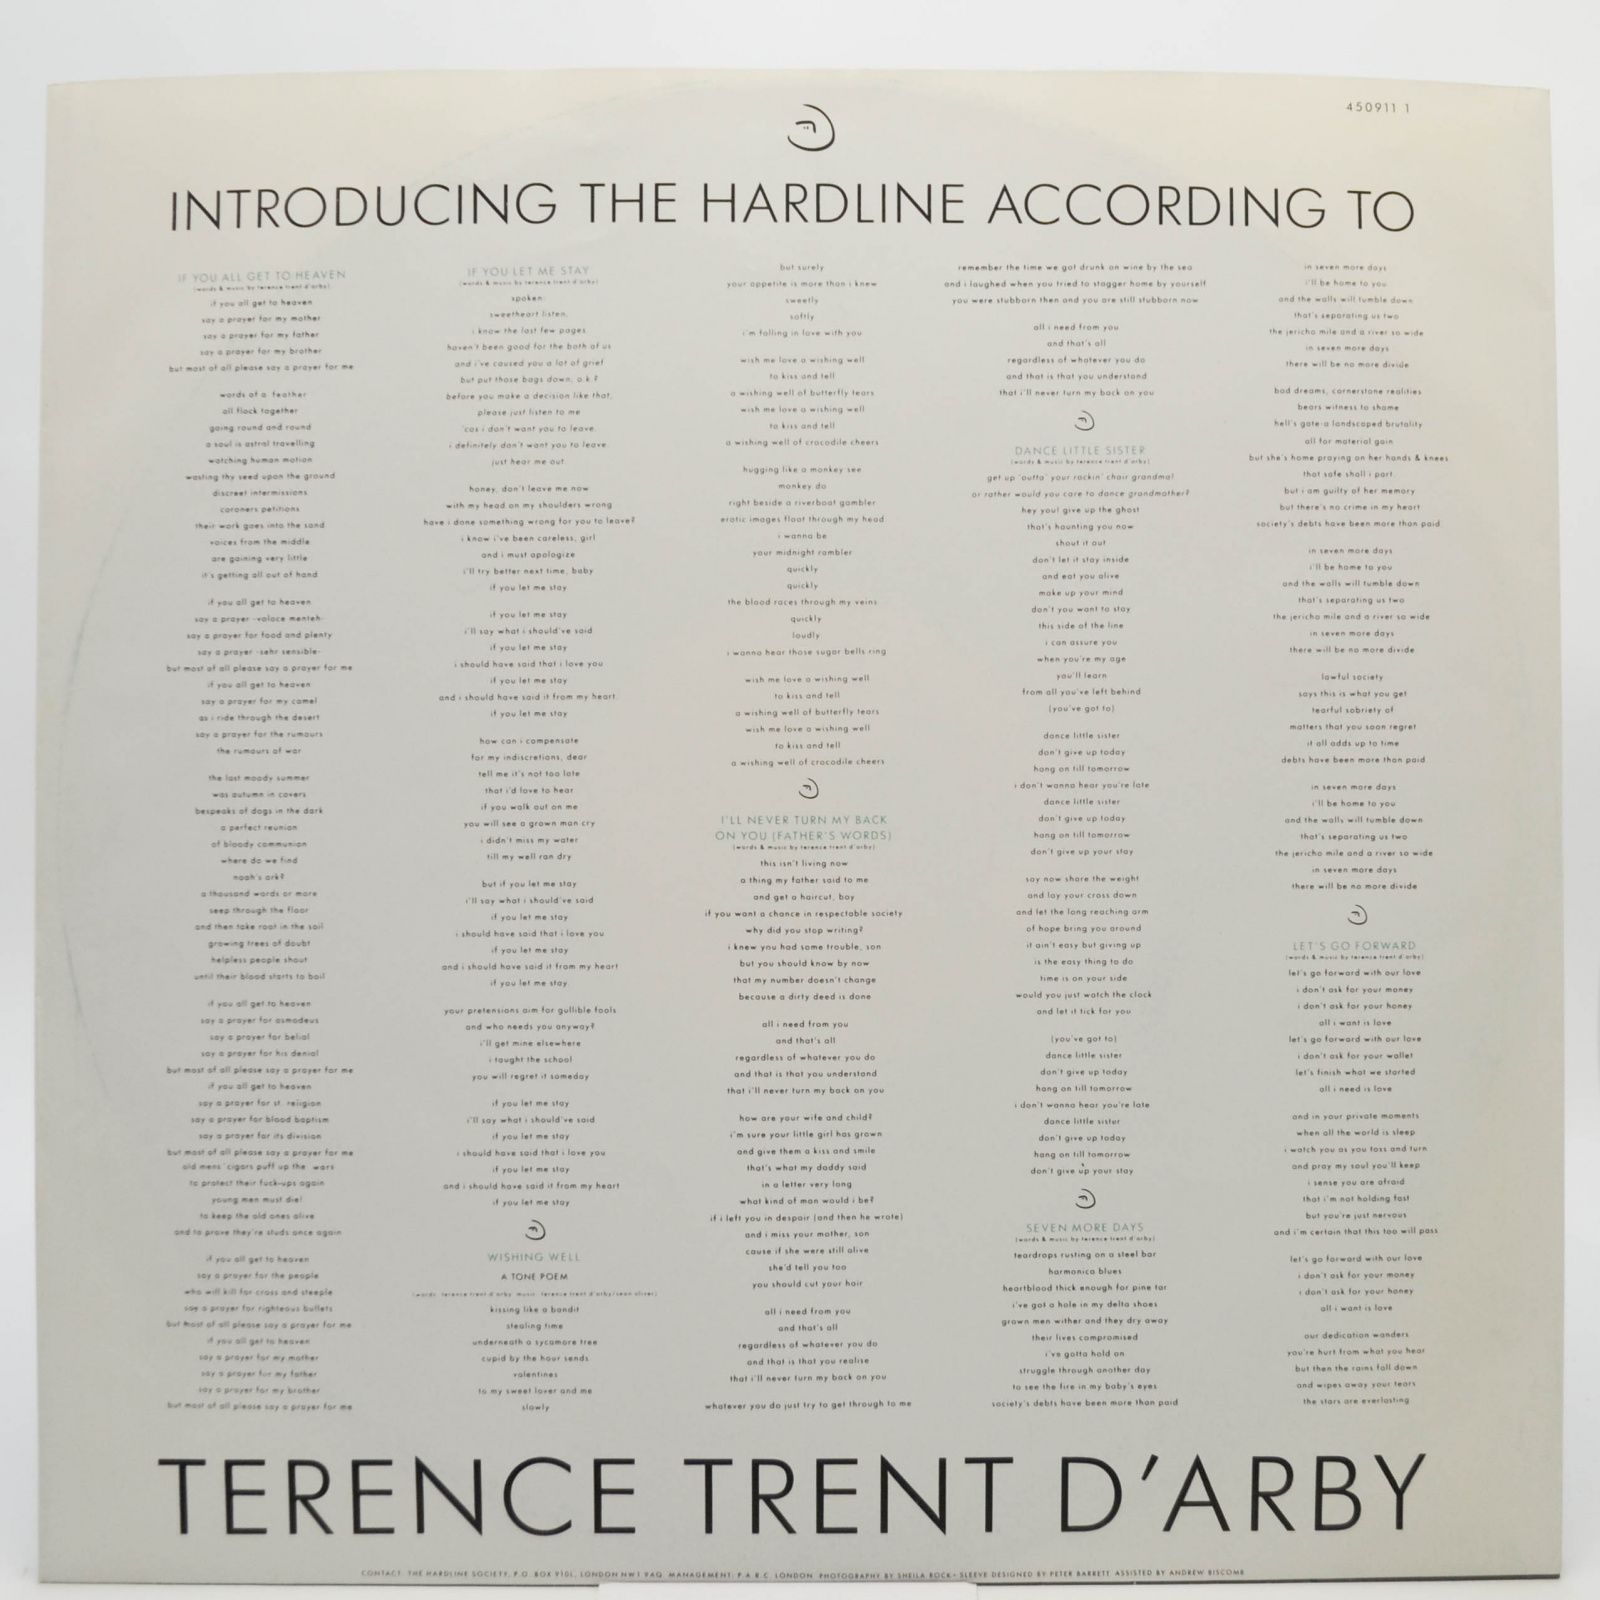 Terence Trent D'Arby — Introducing The Hardline According To Terence Trent D'Arby, 1987